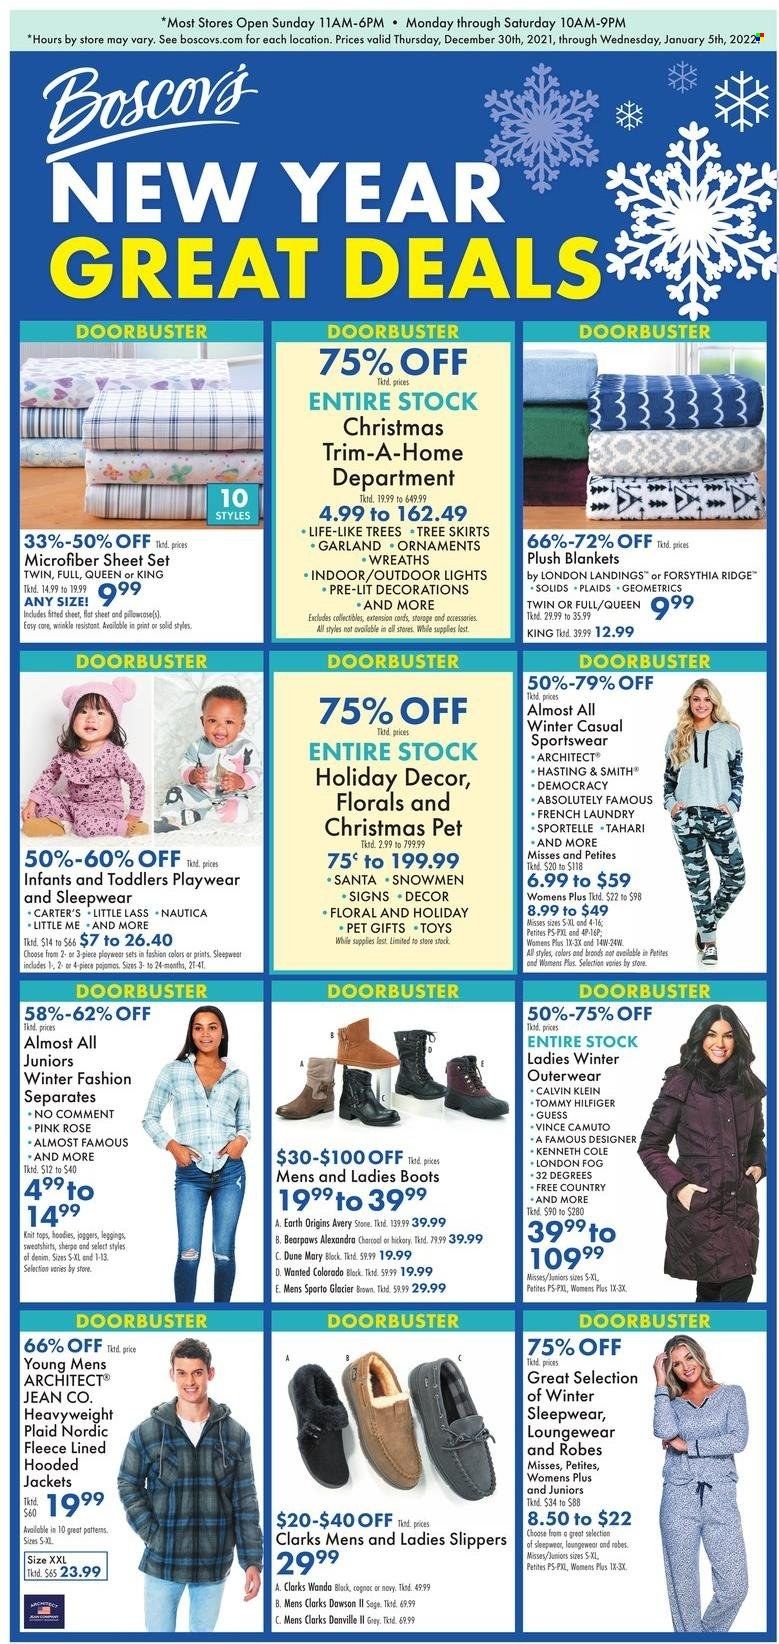 Boscov's Current Sales - Weekly Ads Online